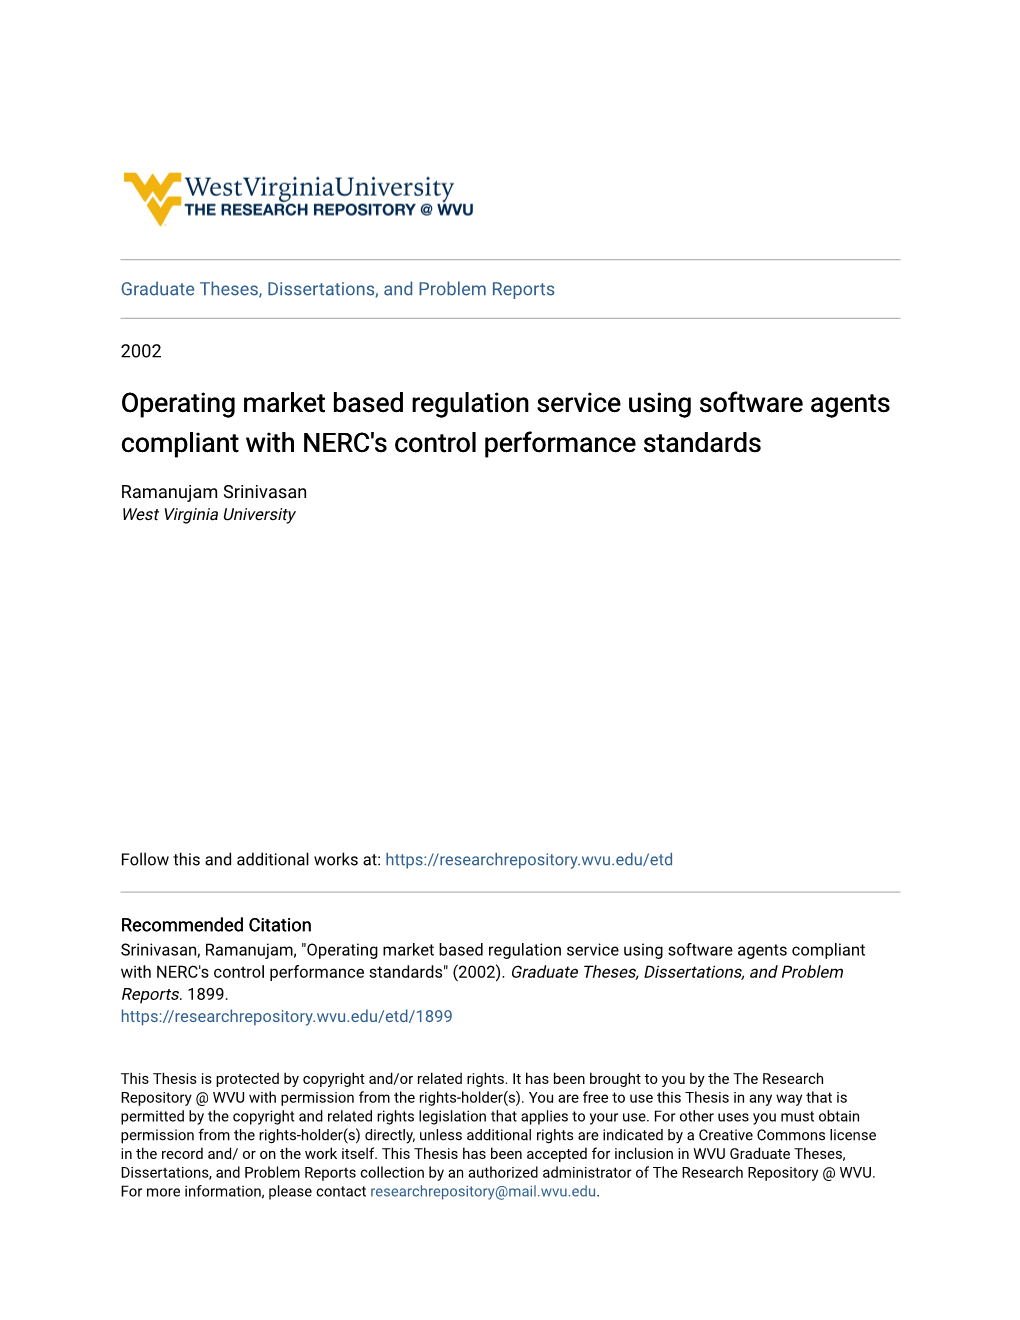 Operating Market Based Regulation Service Using Software Agents Compliant with NERC's Control Performance Standards